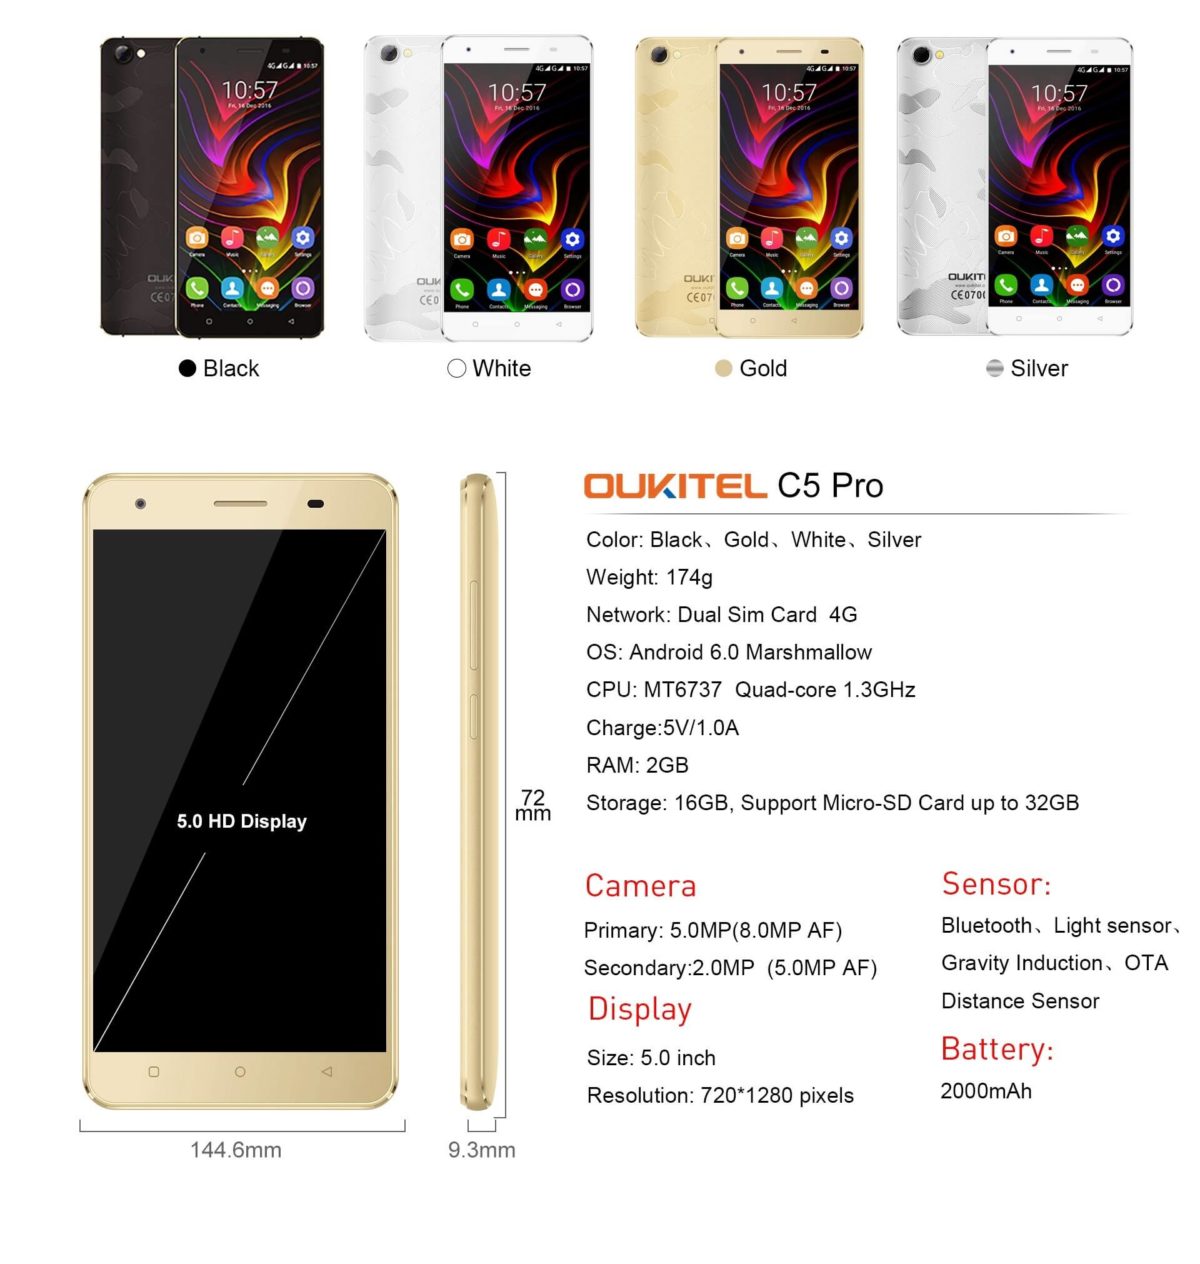 OUKITEL C5 Pro full Specifications and will be priced under $75